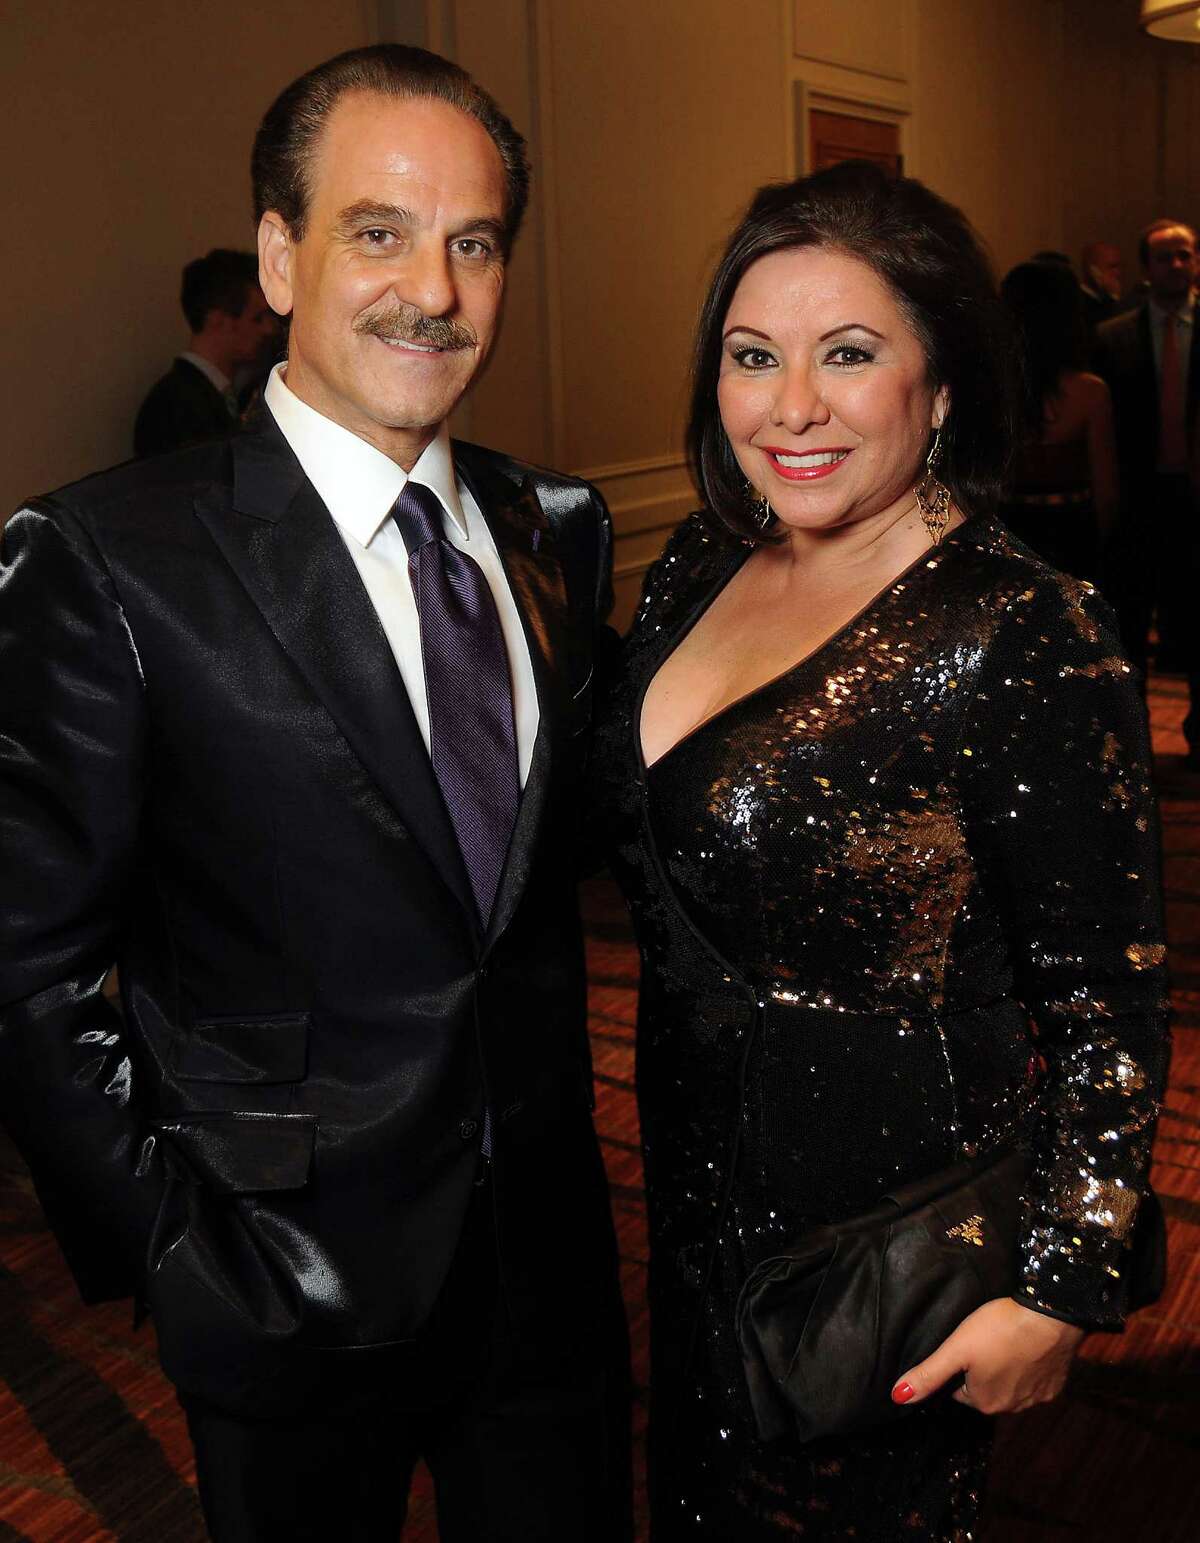 Honorary chairs Debbie and Rudy Festari at the Una Notte in Italia event at the Westin Galleria Hotel Friday Nov. 07, 2014.(Dave Rossman photo)Honorary chairs Debbie and Rudy Festari at the Una Notte in Italia event at the Westin Galleria Hotel Friday Nov. 07, 2014.(Dave Rossman photo)